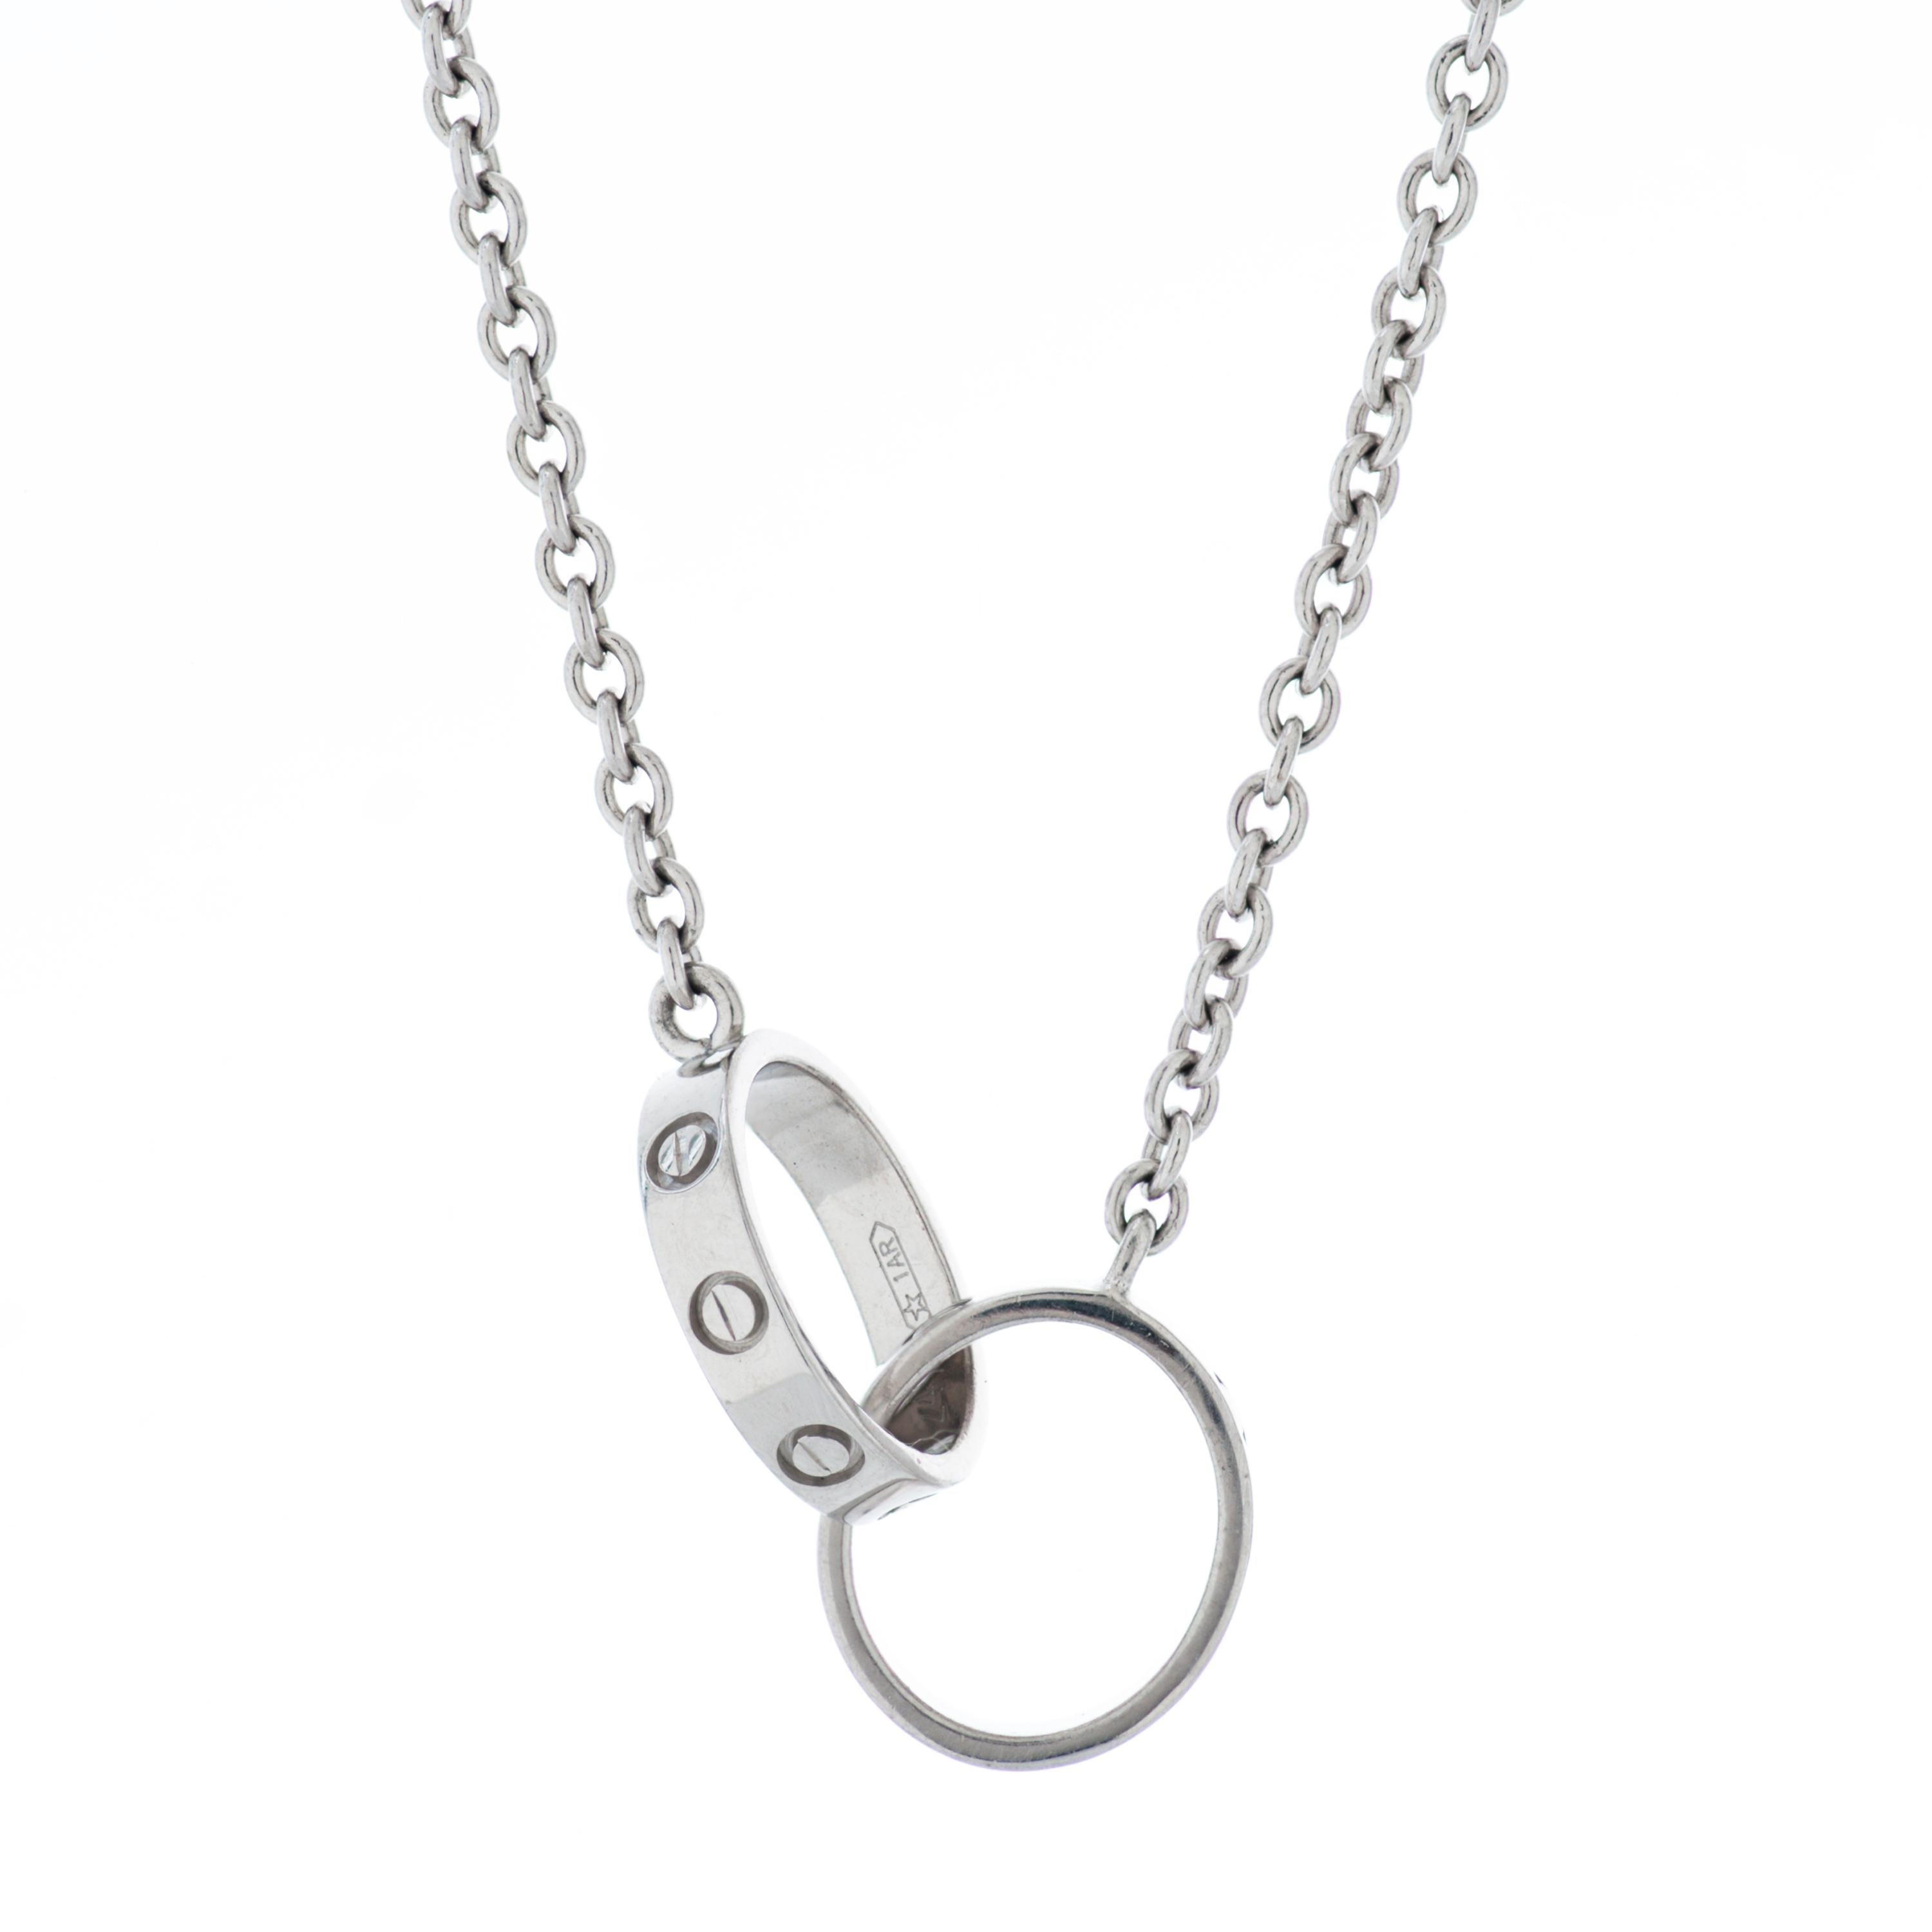 Cartier Love necklace in 18k white gold.

This Cartier necklace features two interlocking Love bands measuring approximately 10mm each, attached to a 17 inch long 1.8mm thick chain.  

7.1 grams.
Numbered and signed Cartier.